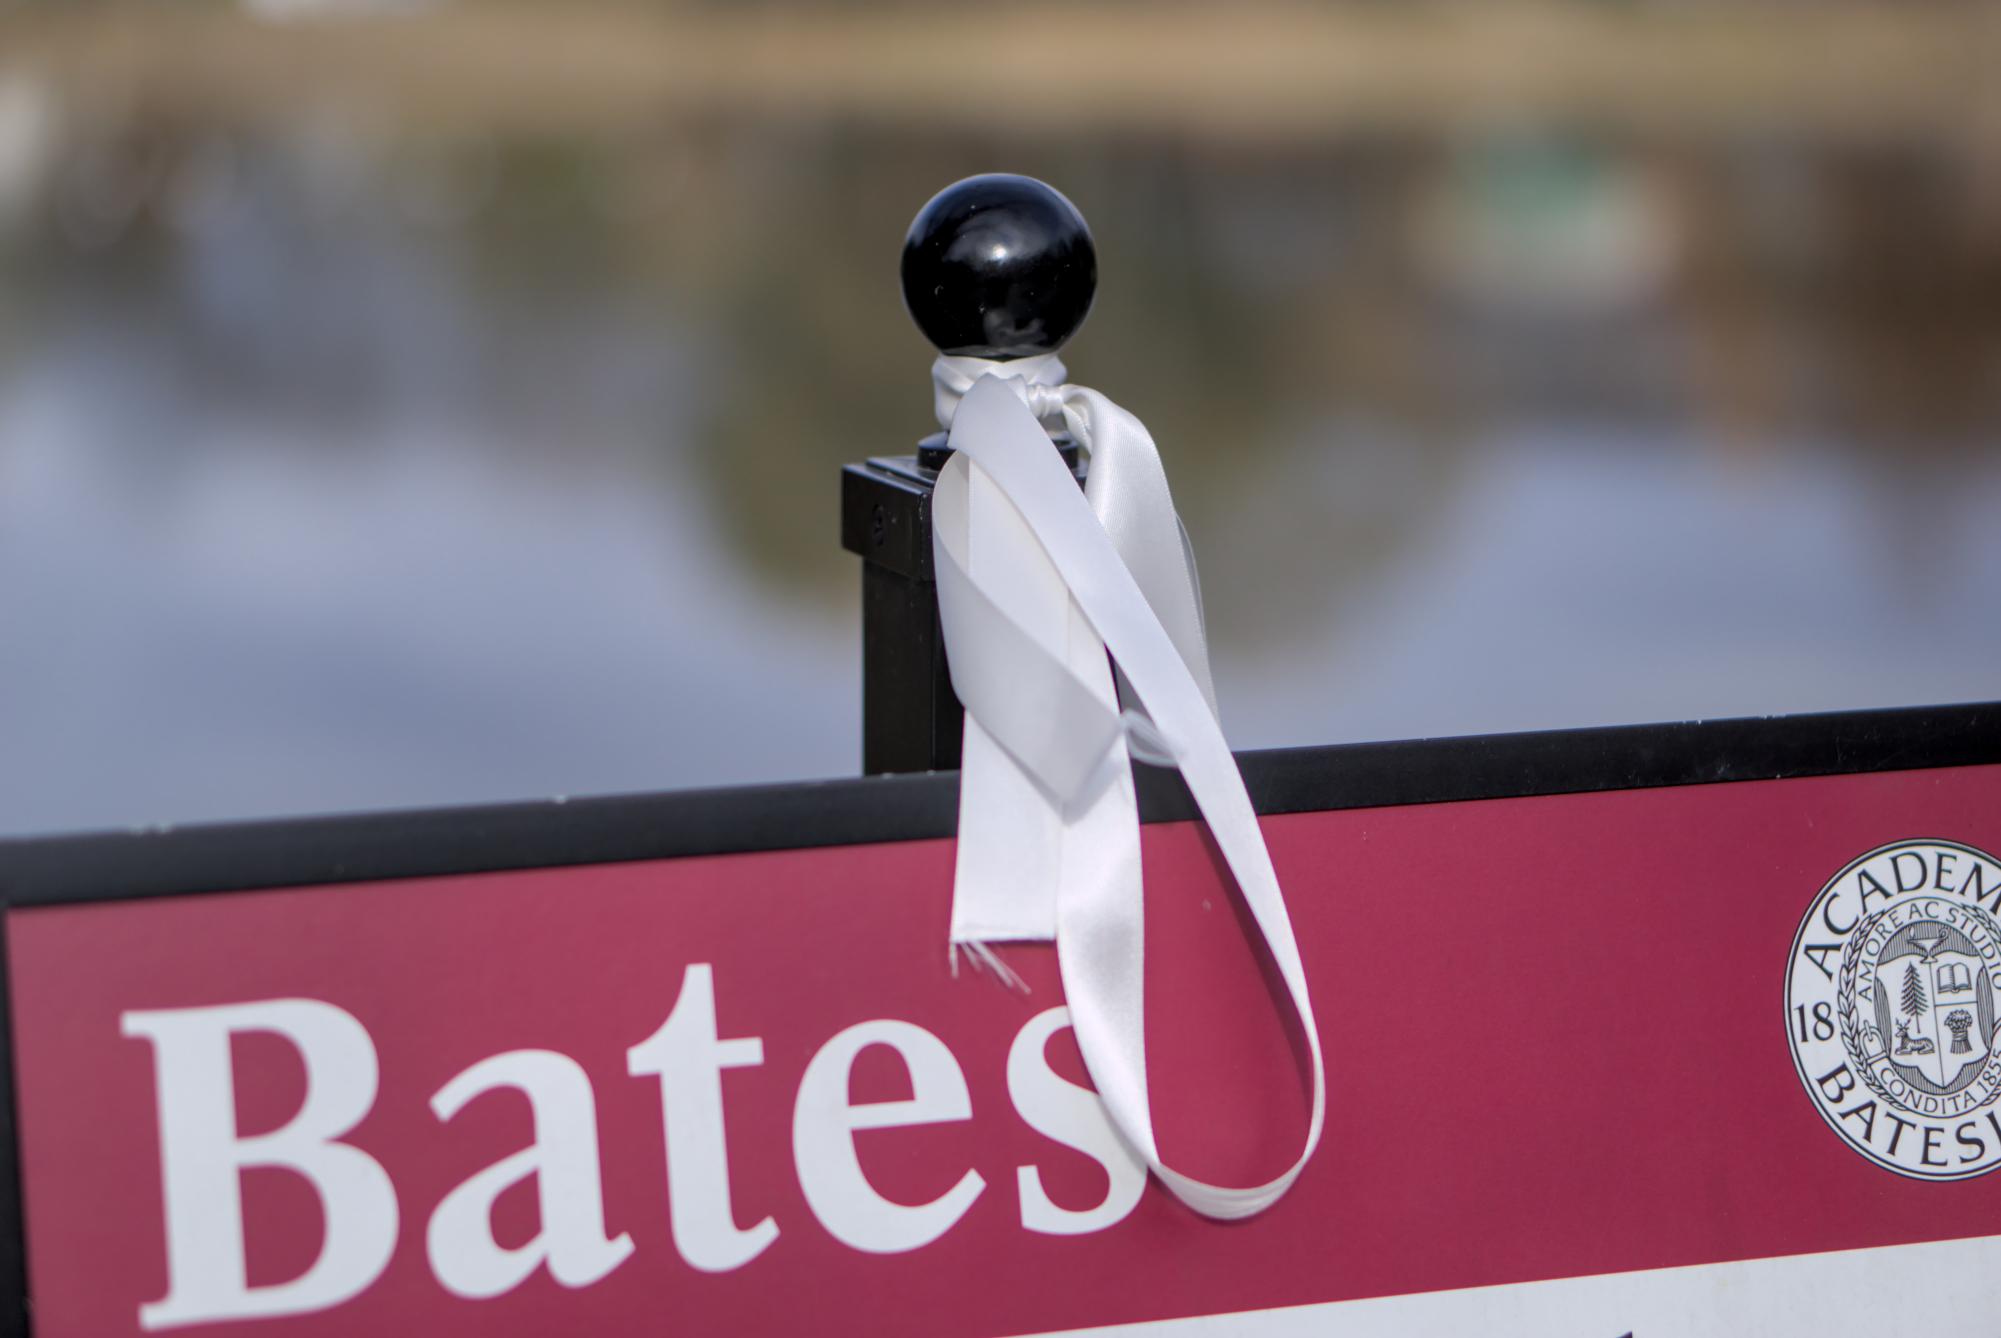 A white ribbon in memory of the victims of the Lewiston mass shooting hangs on a sign on campus. Ribbons were distributed in bundles of 18 and will hang for 18 days to commemorate the 18 people killed on Oct. 25. Noah Skinner/The Bates Student.